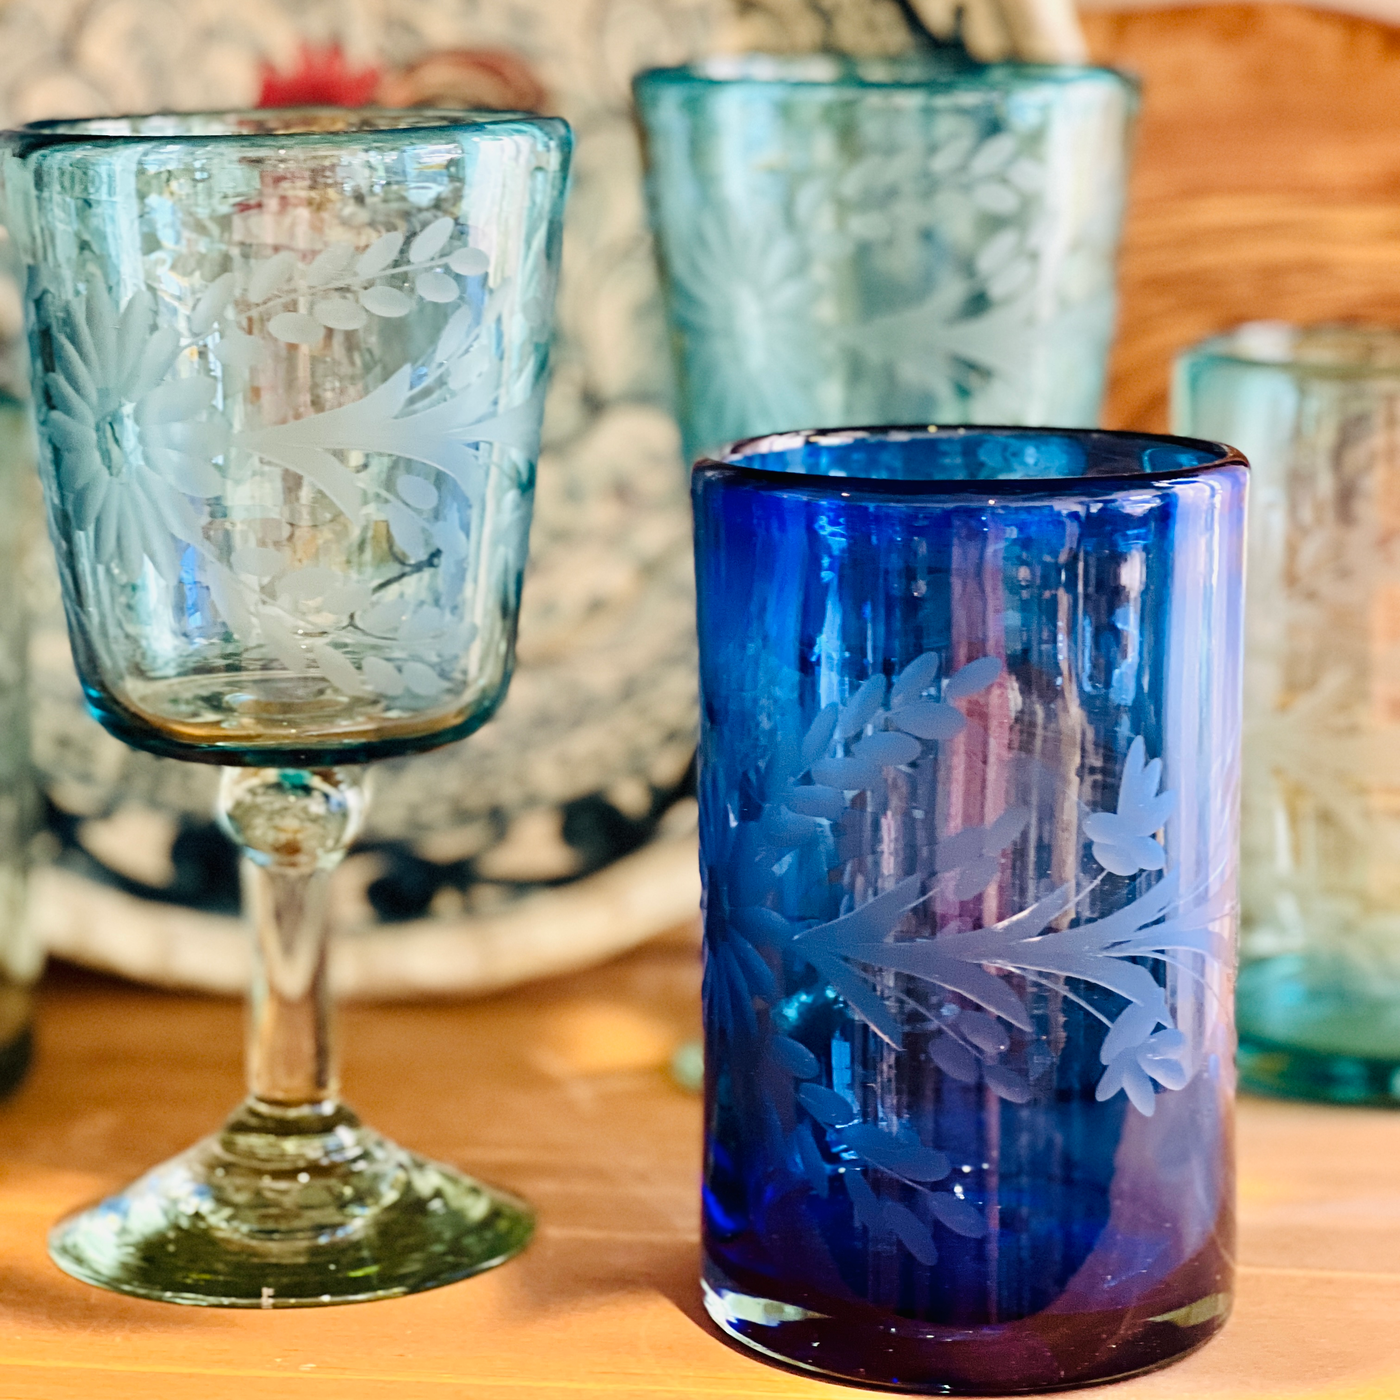 Collection photo for our "Drinkware" collection. Image showcases a few different styles of glasses & tumblers